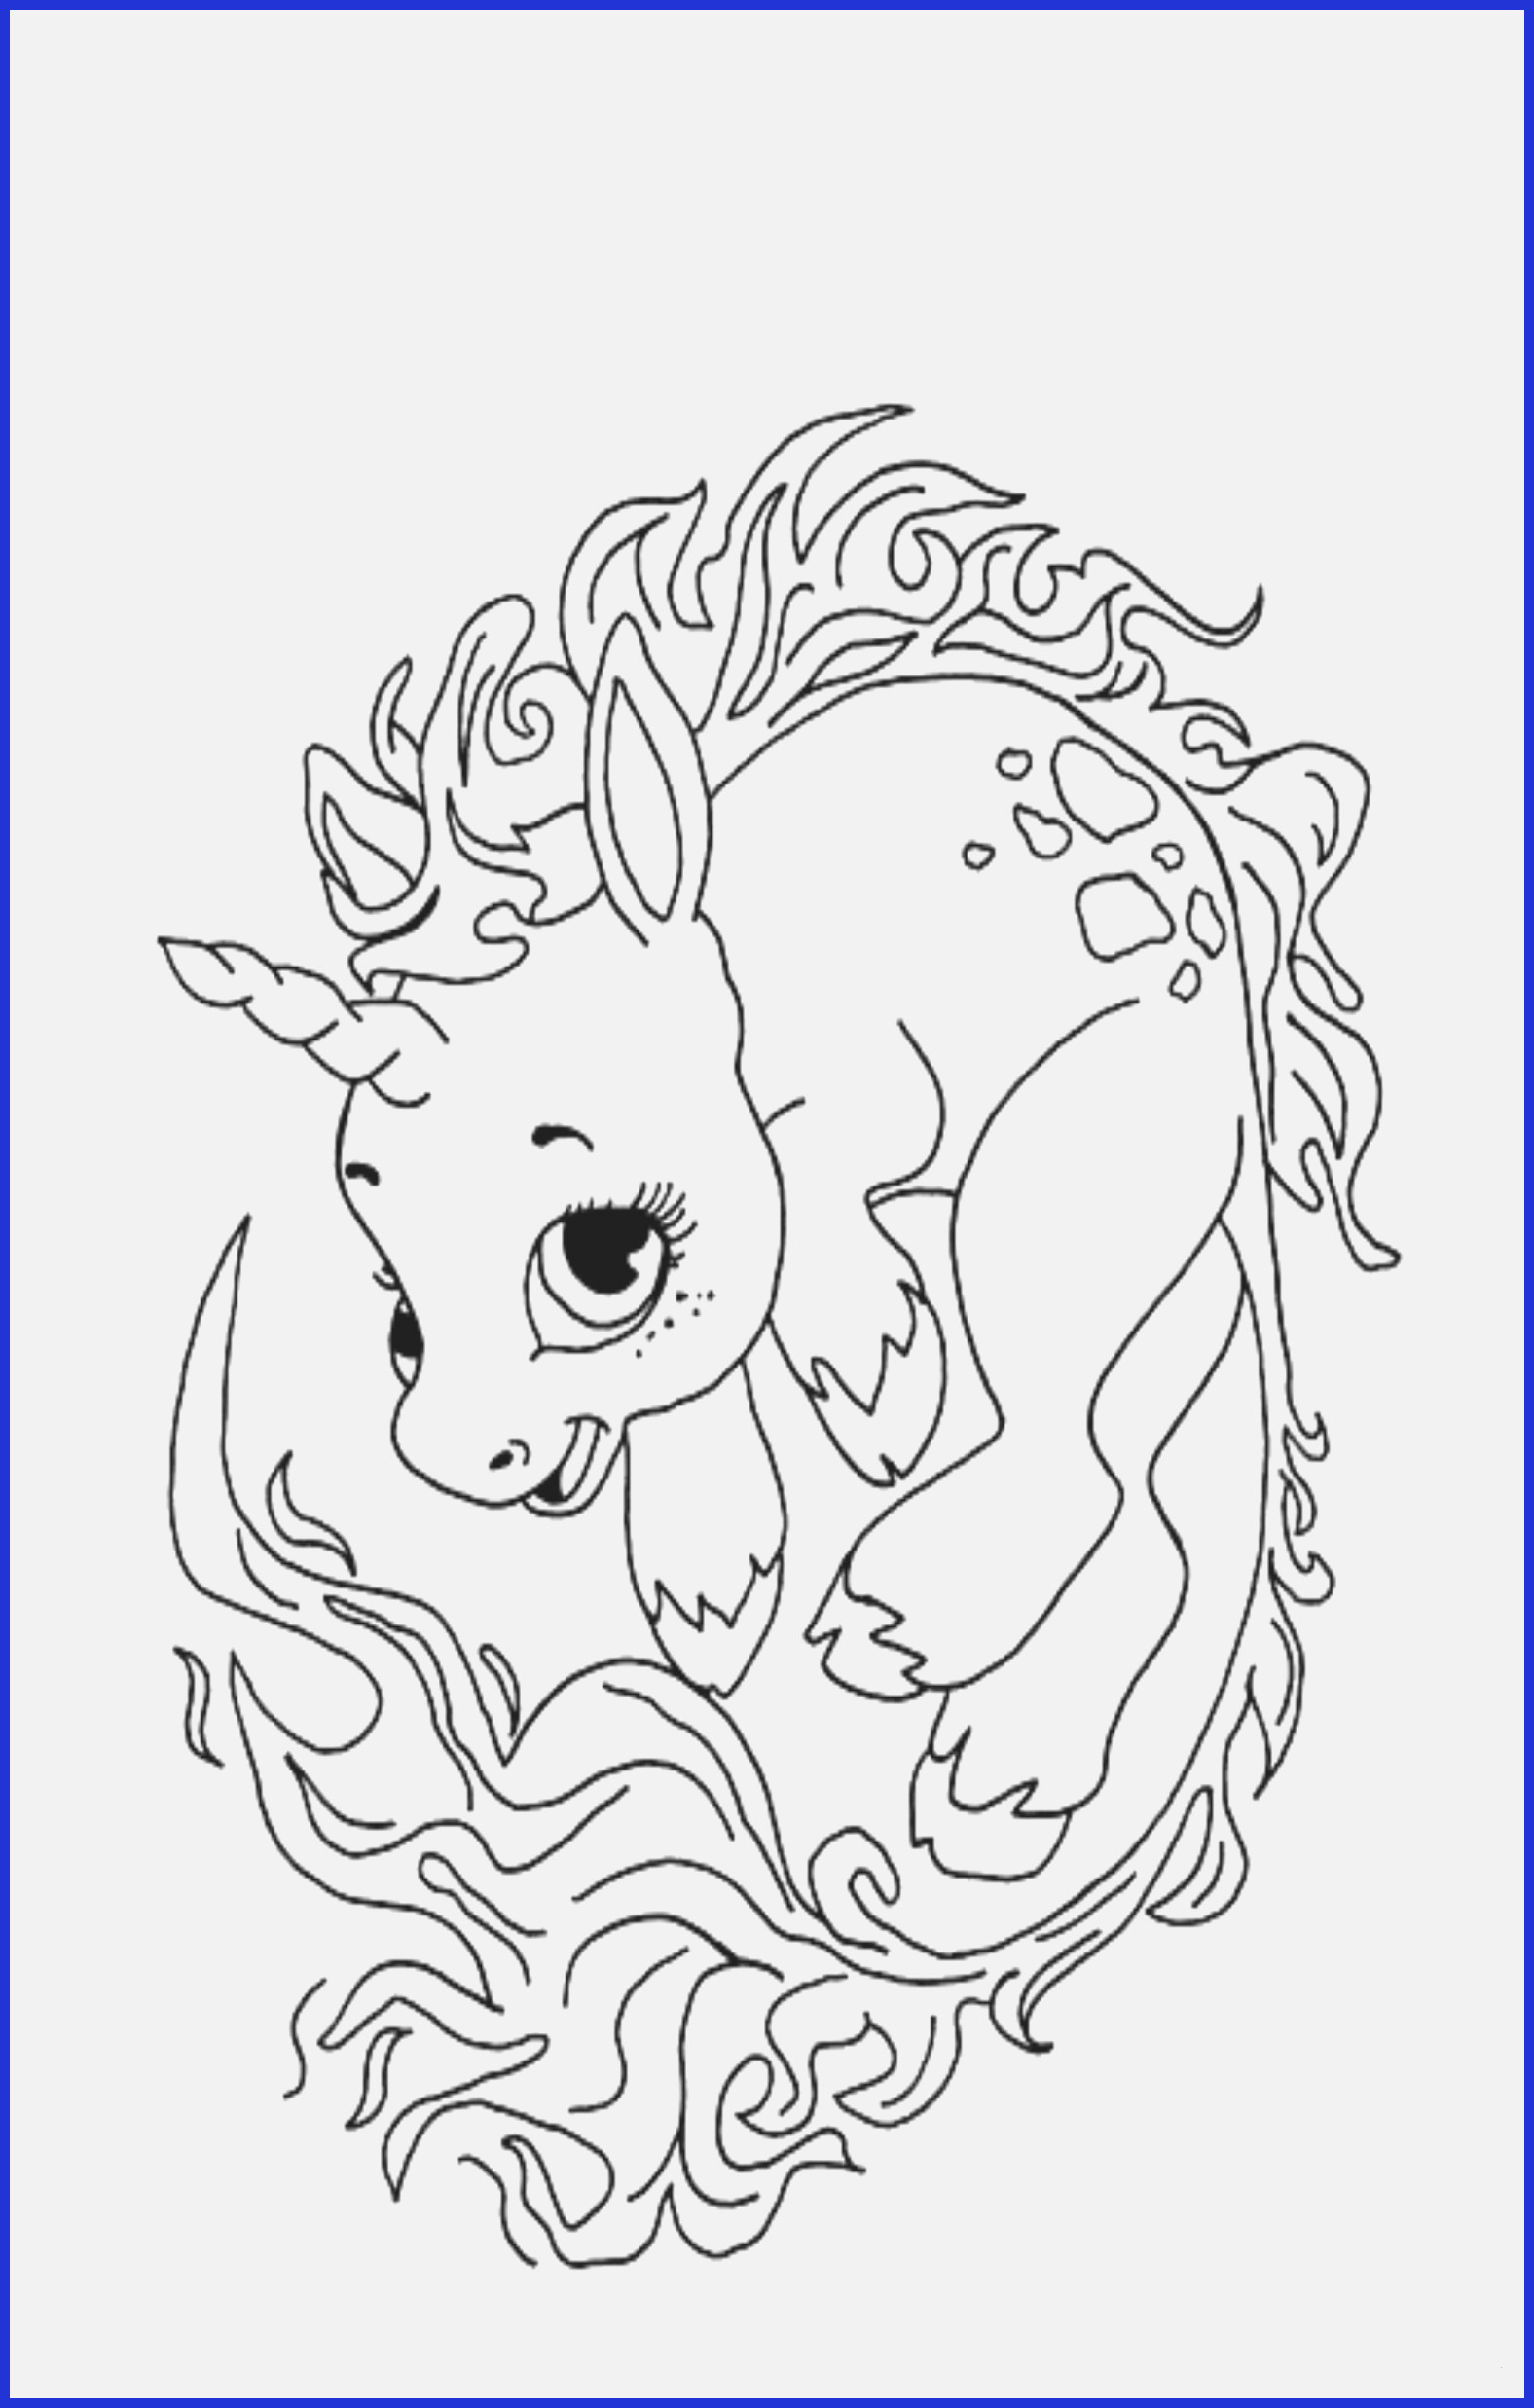 coloring page of animals for adults cool photos coloring page coloring page cute pages for adults printable od dog of coloring page of animals for adults